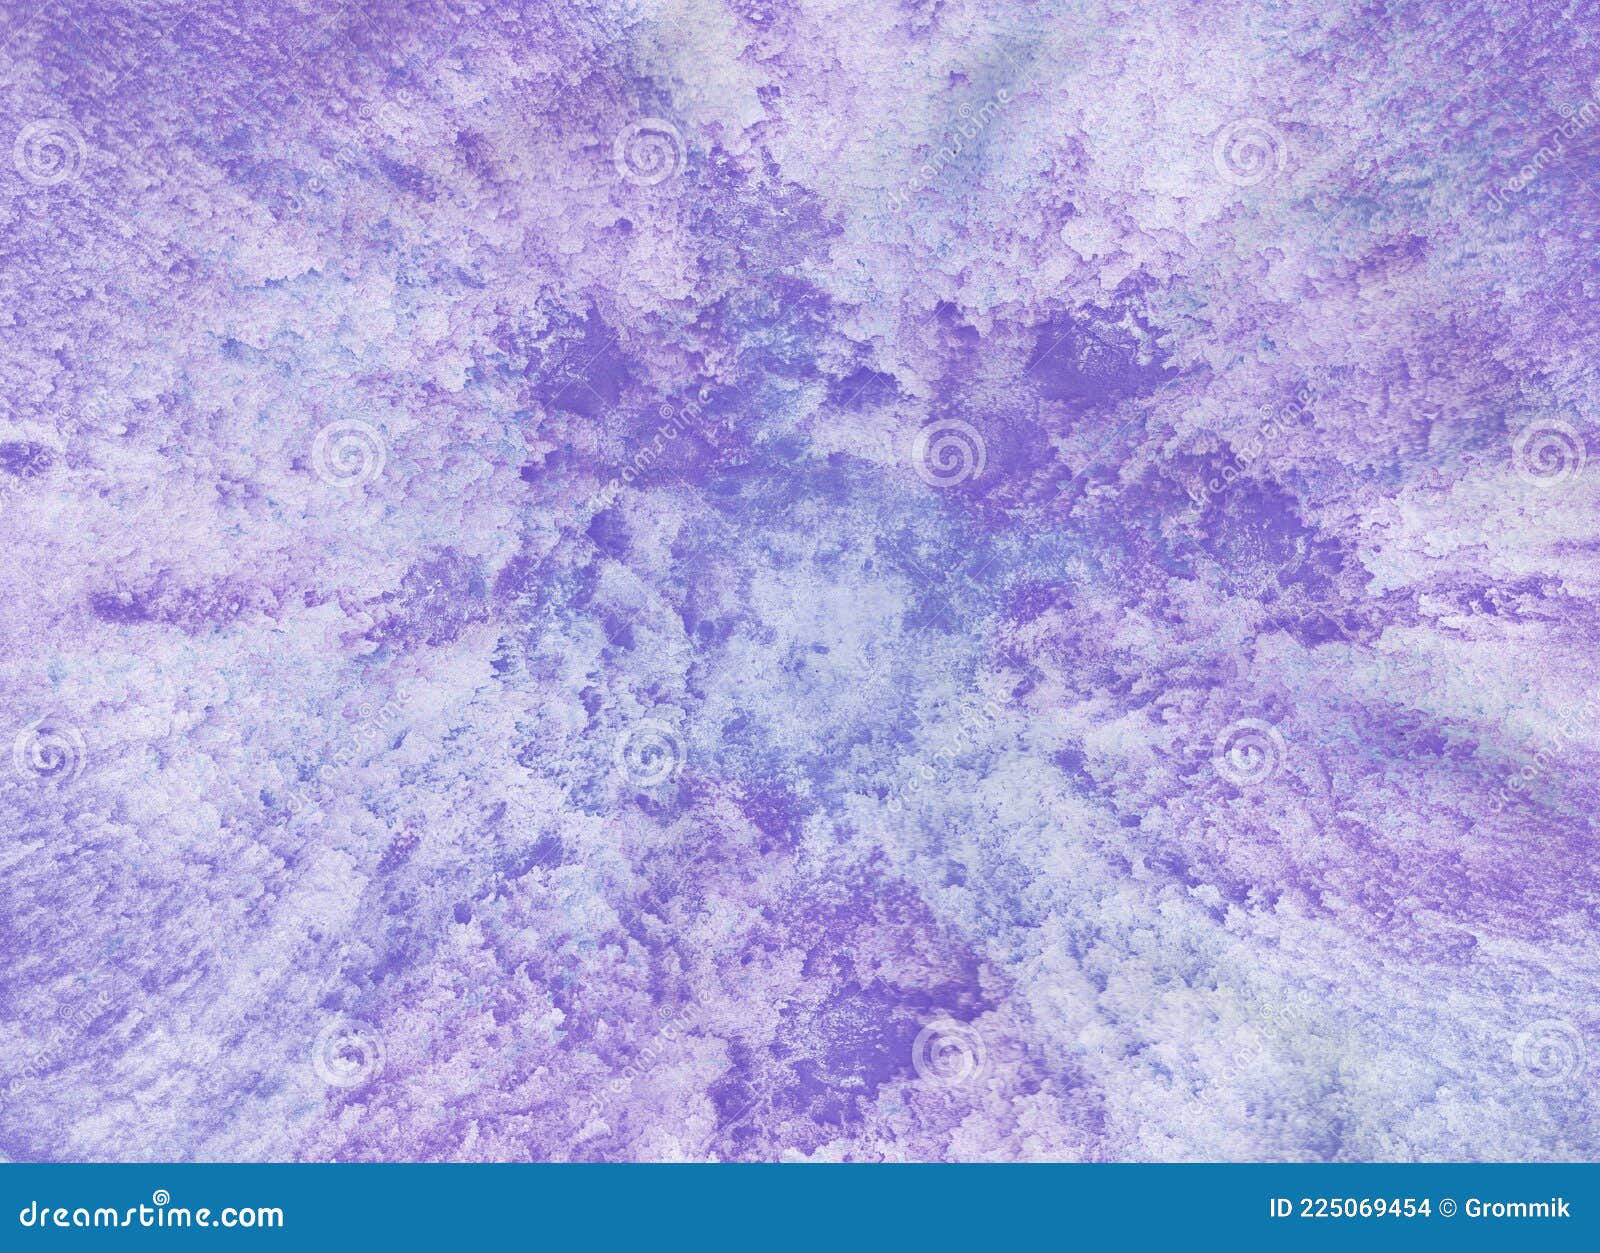 Watercolor Background in Blue and Purple Tones. Illustration for ...